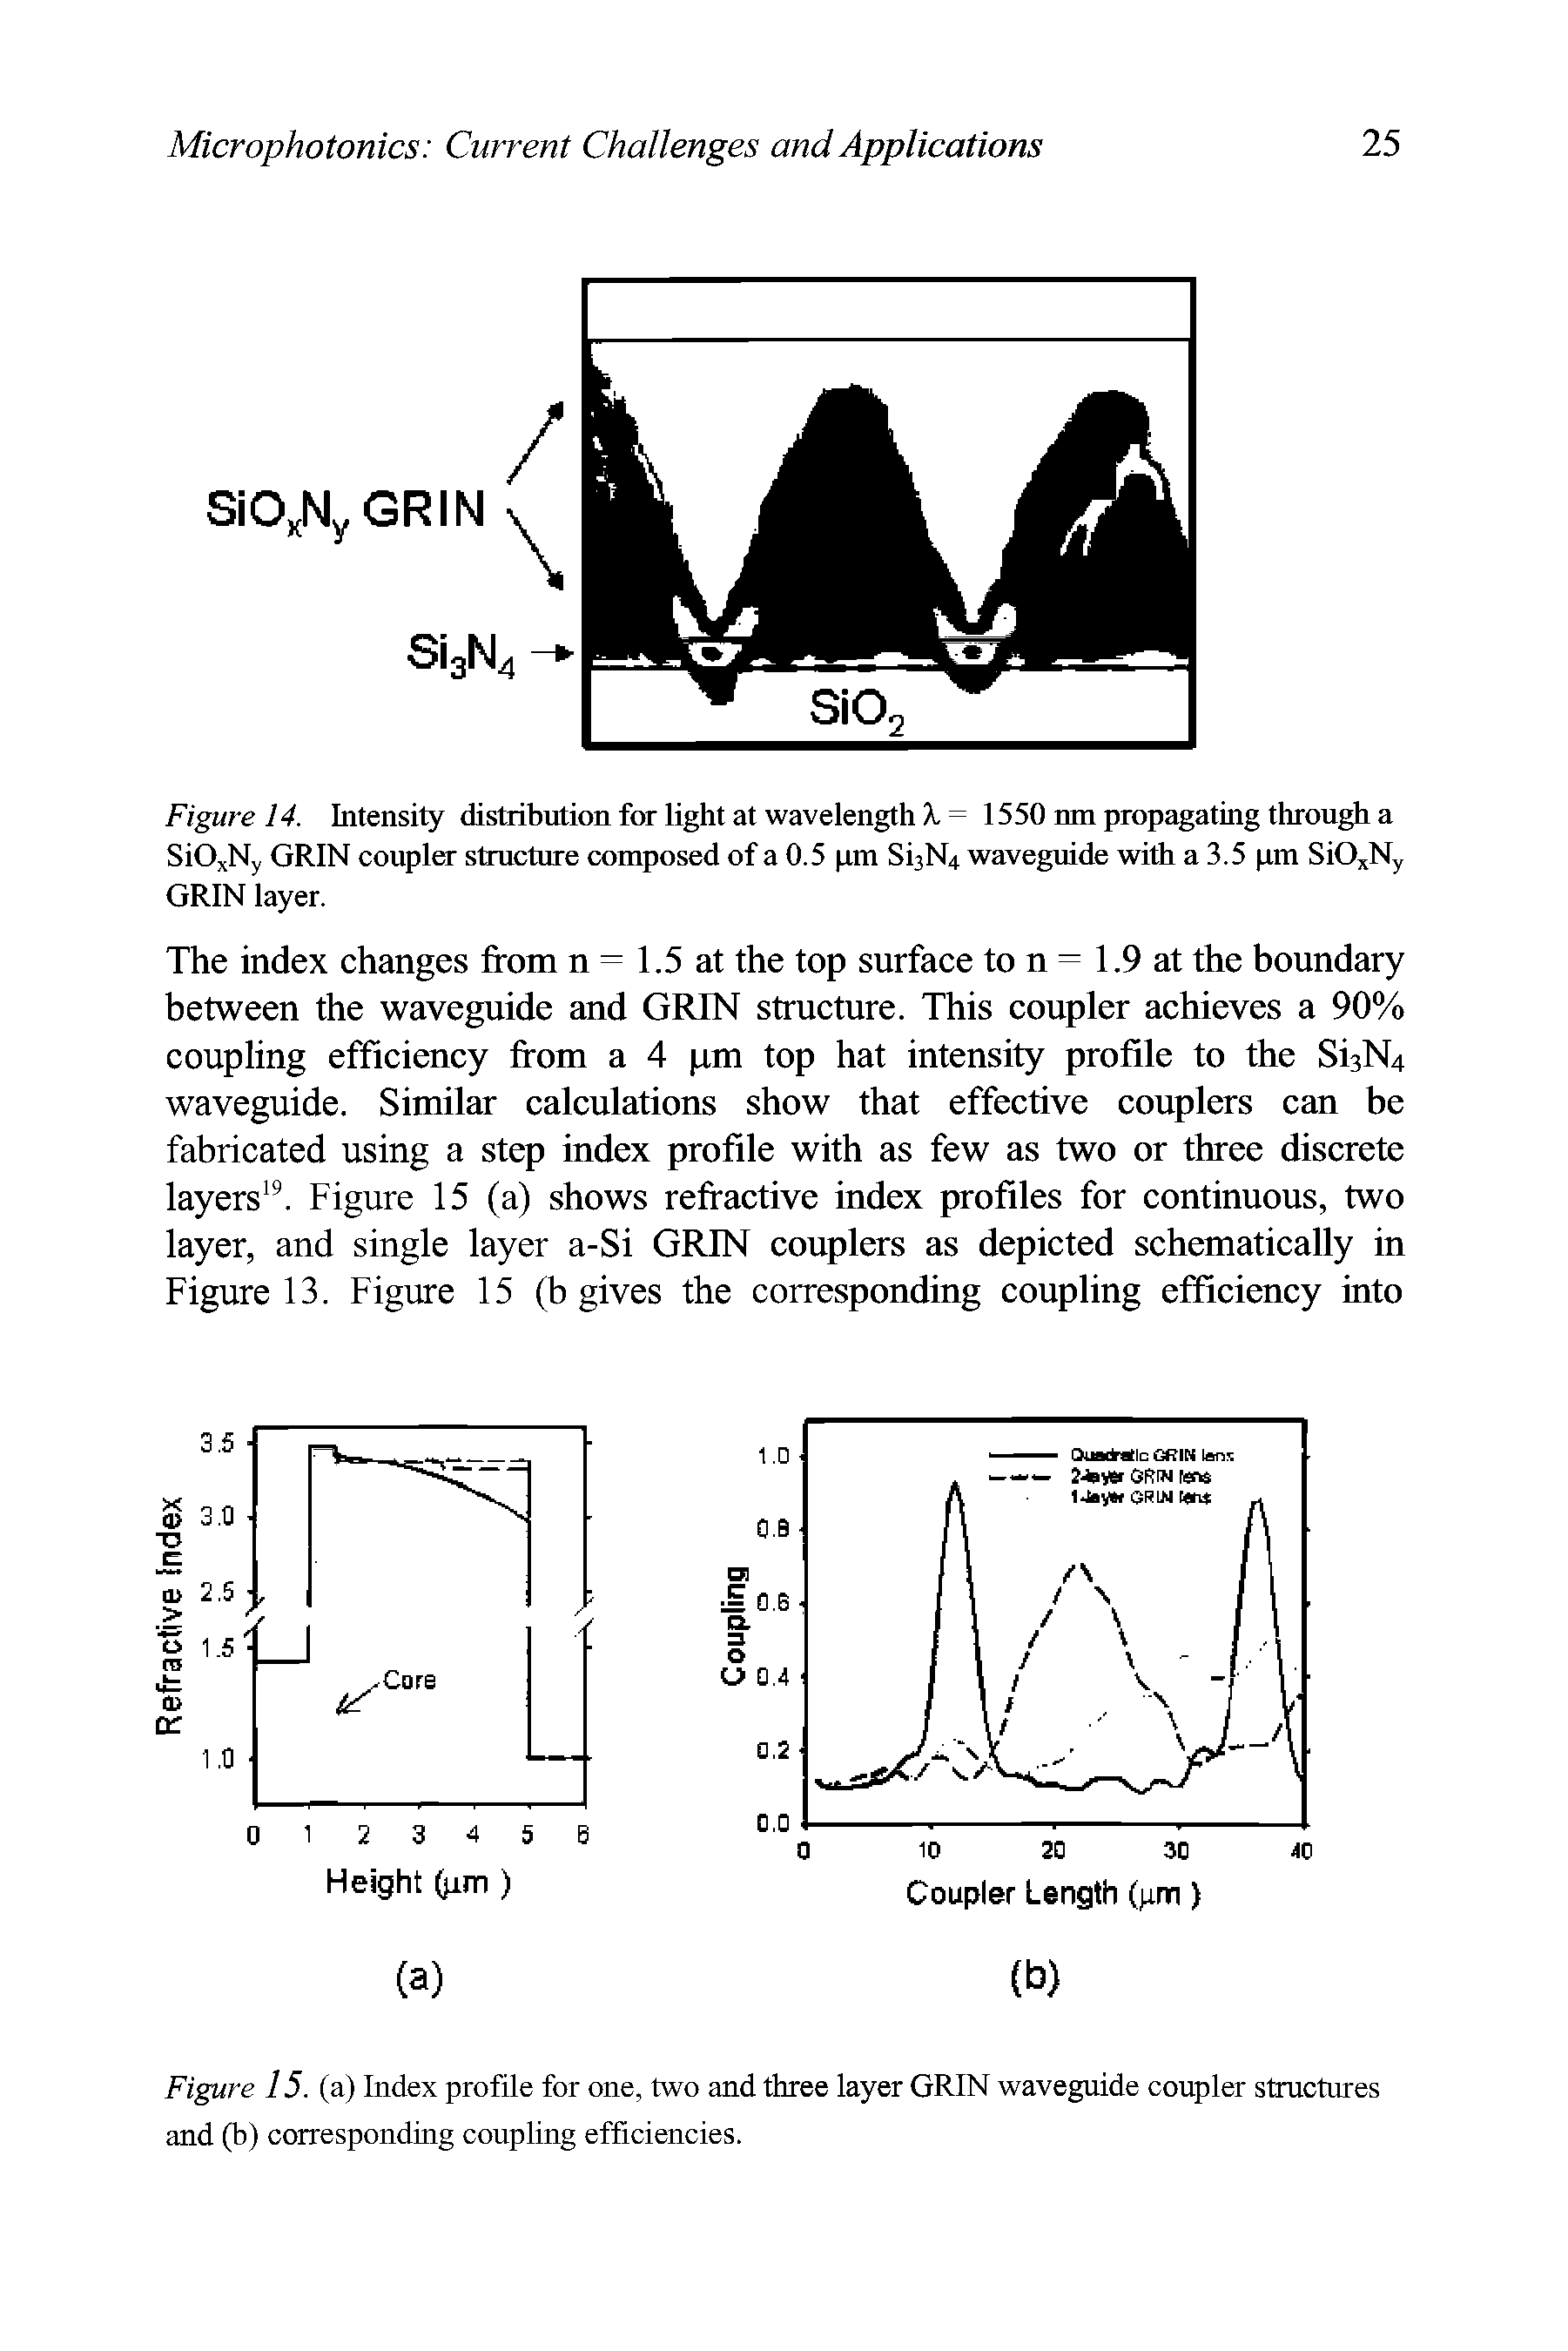 Figure 14. Intensity distribution for light at wavelength X = 1550 nm propagating through a SiOxNy GRIN coupler structure composed of a 0.5 im Si3N4 waveguide with a 3.5 im SiO Ny GRIN layer.